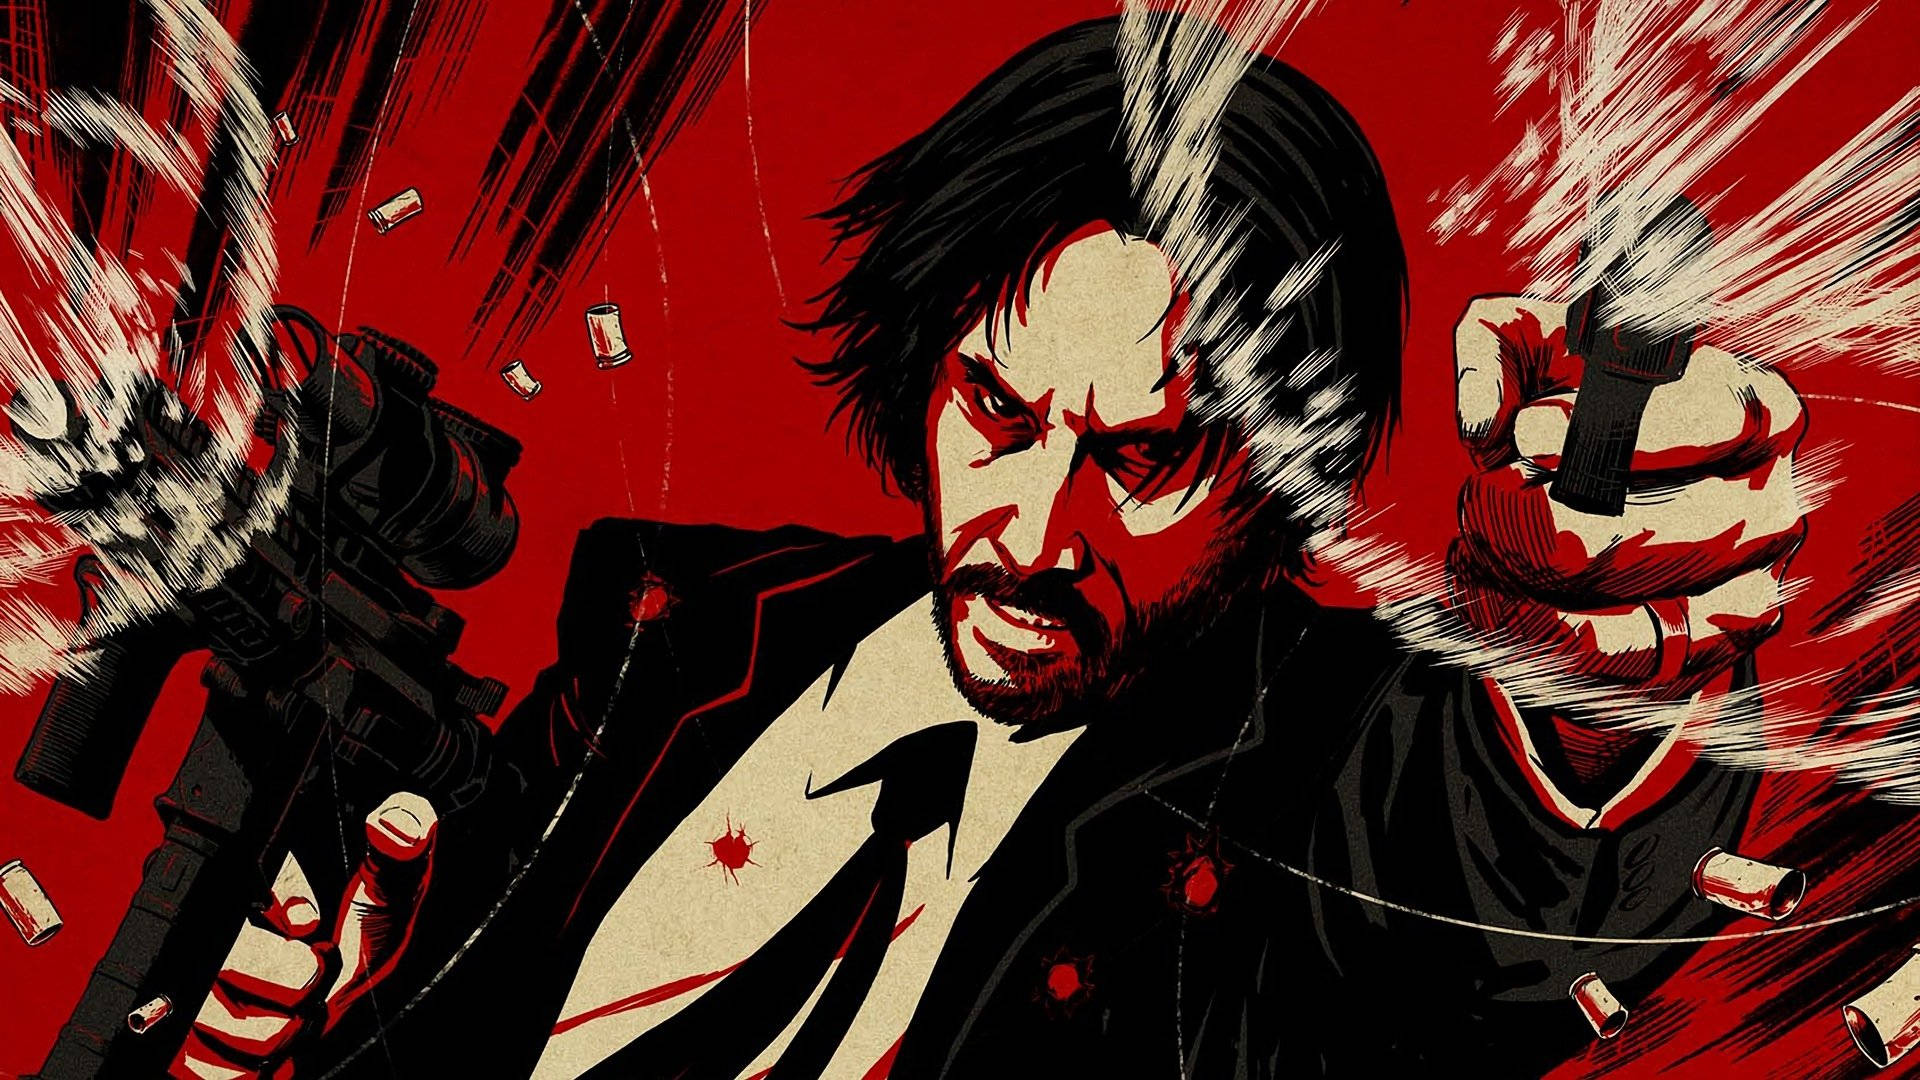 John Wick 1920X1080 Wallpaper and Background Image